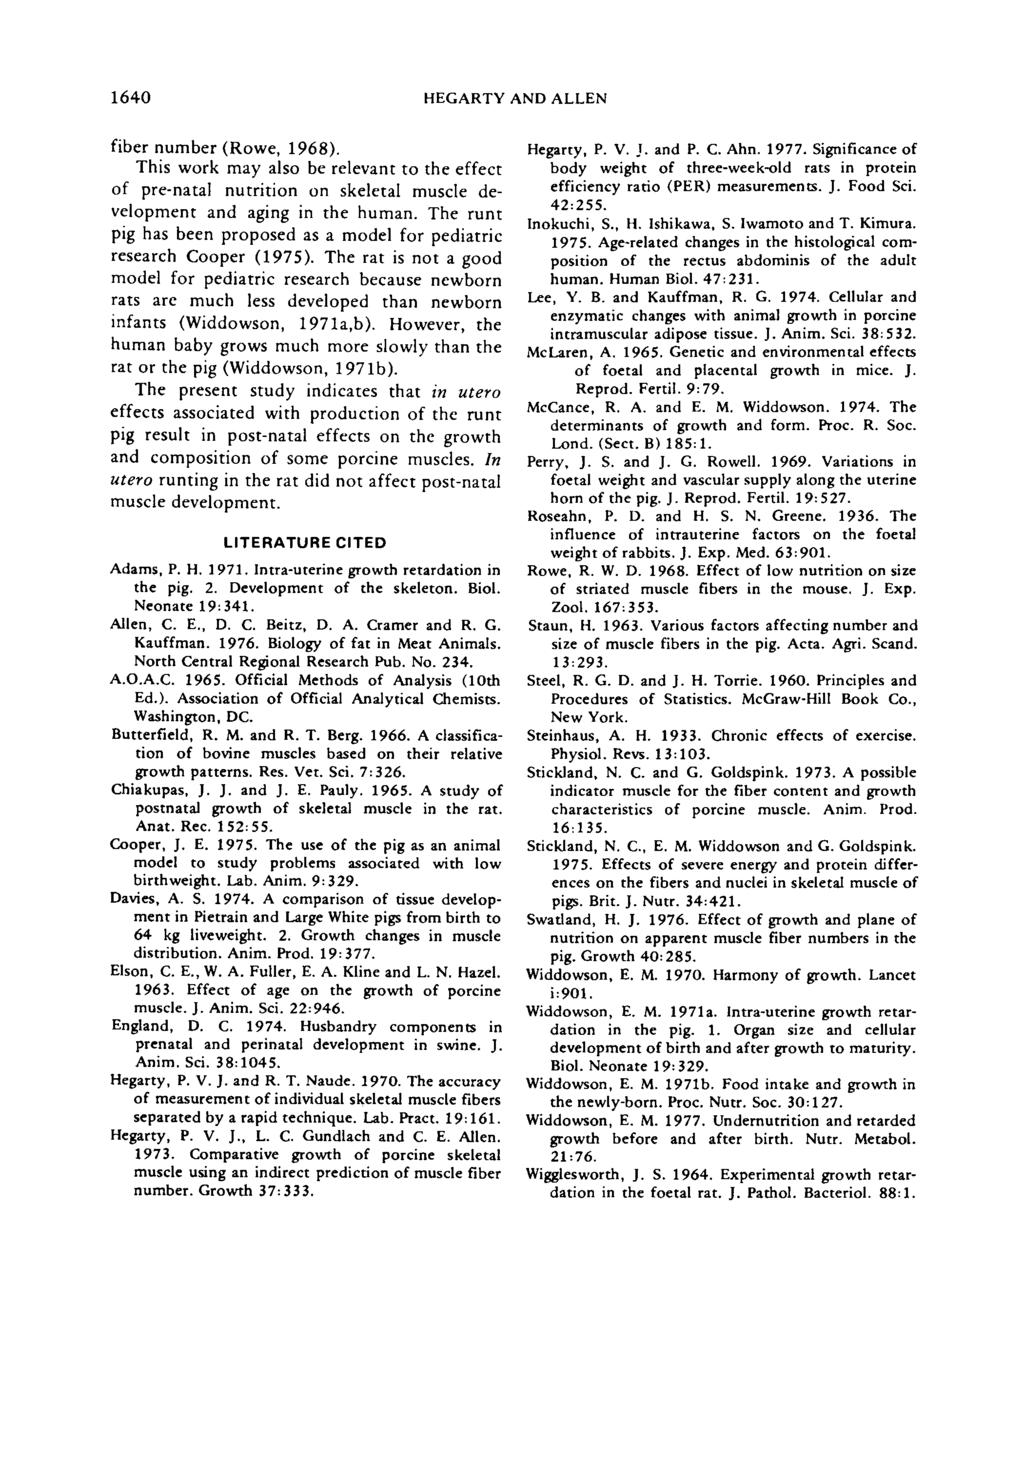 1640 HEGARTY AND ALLEN fiber number (Rwe, 1968). This wrk may als be relevant t the effect f pre-natal nutritin n skeletal muscle develpment and aging in the human.